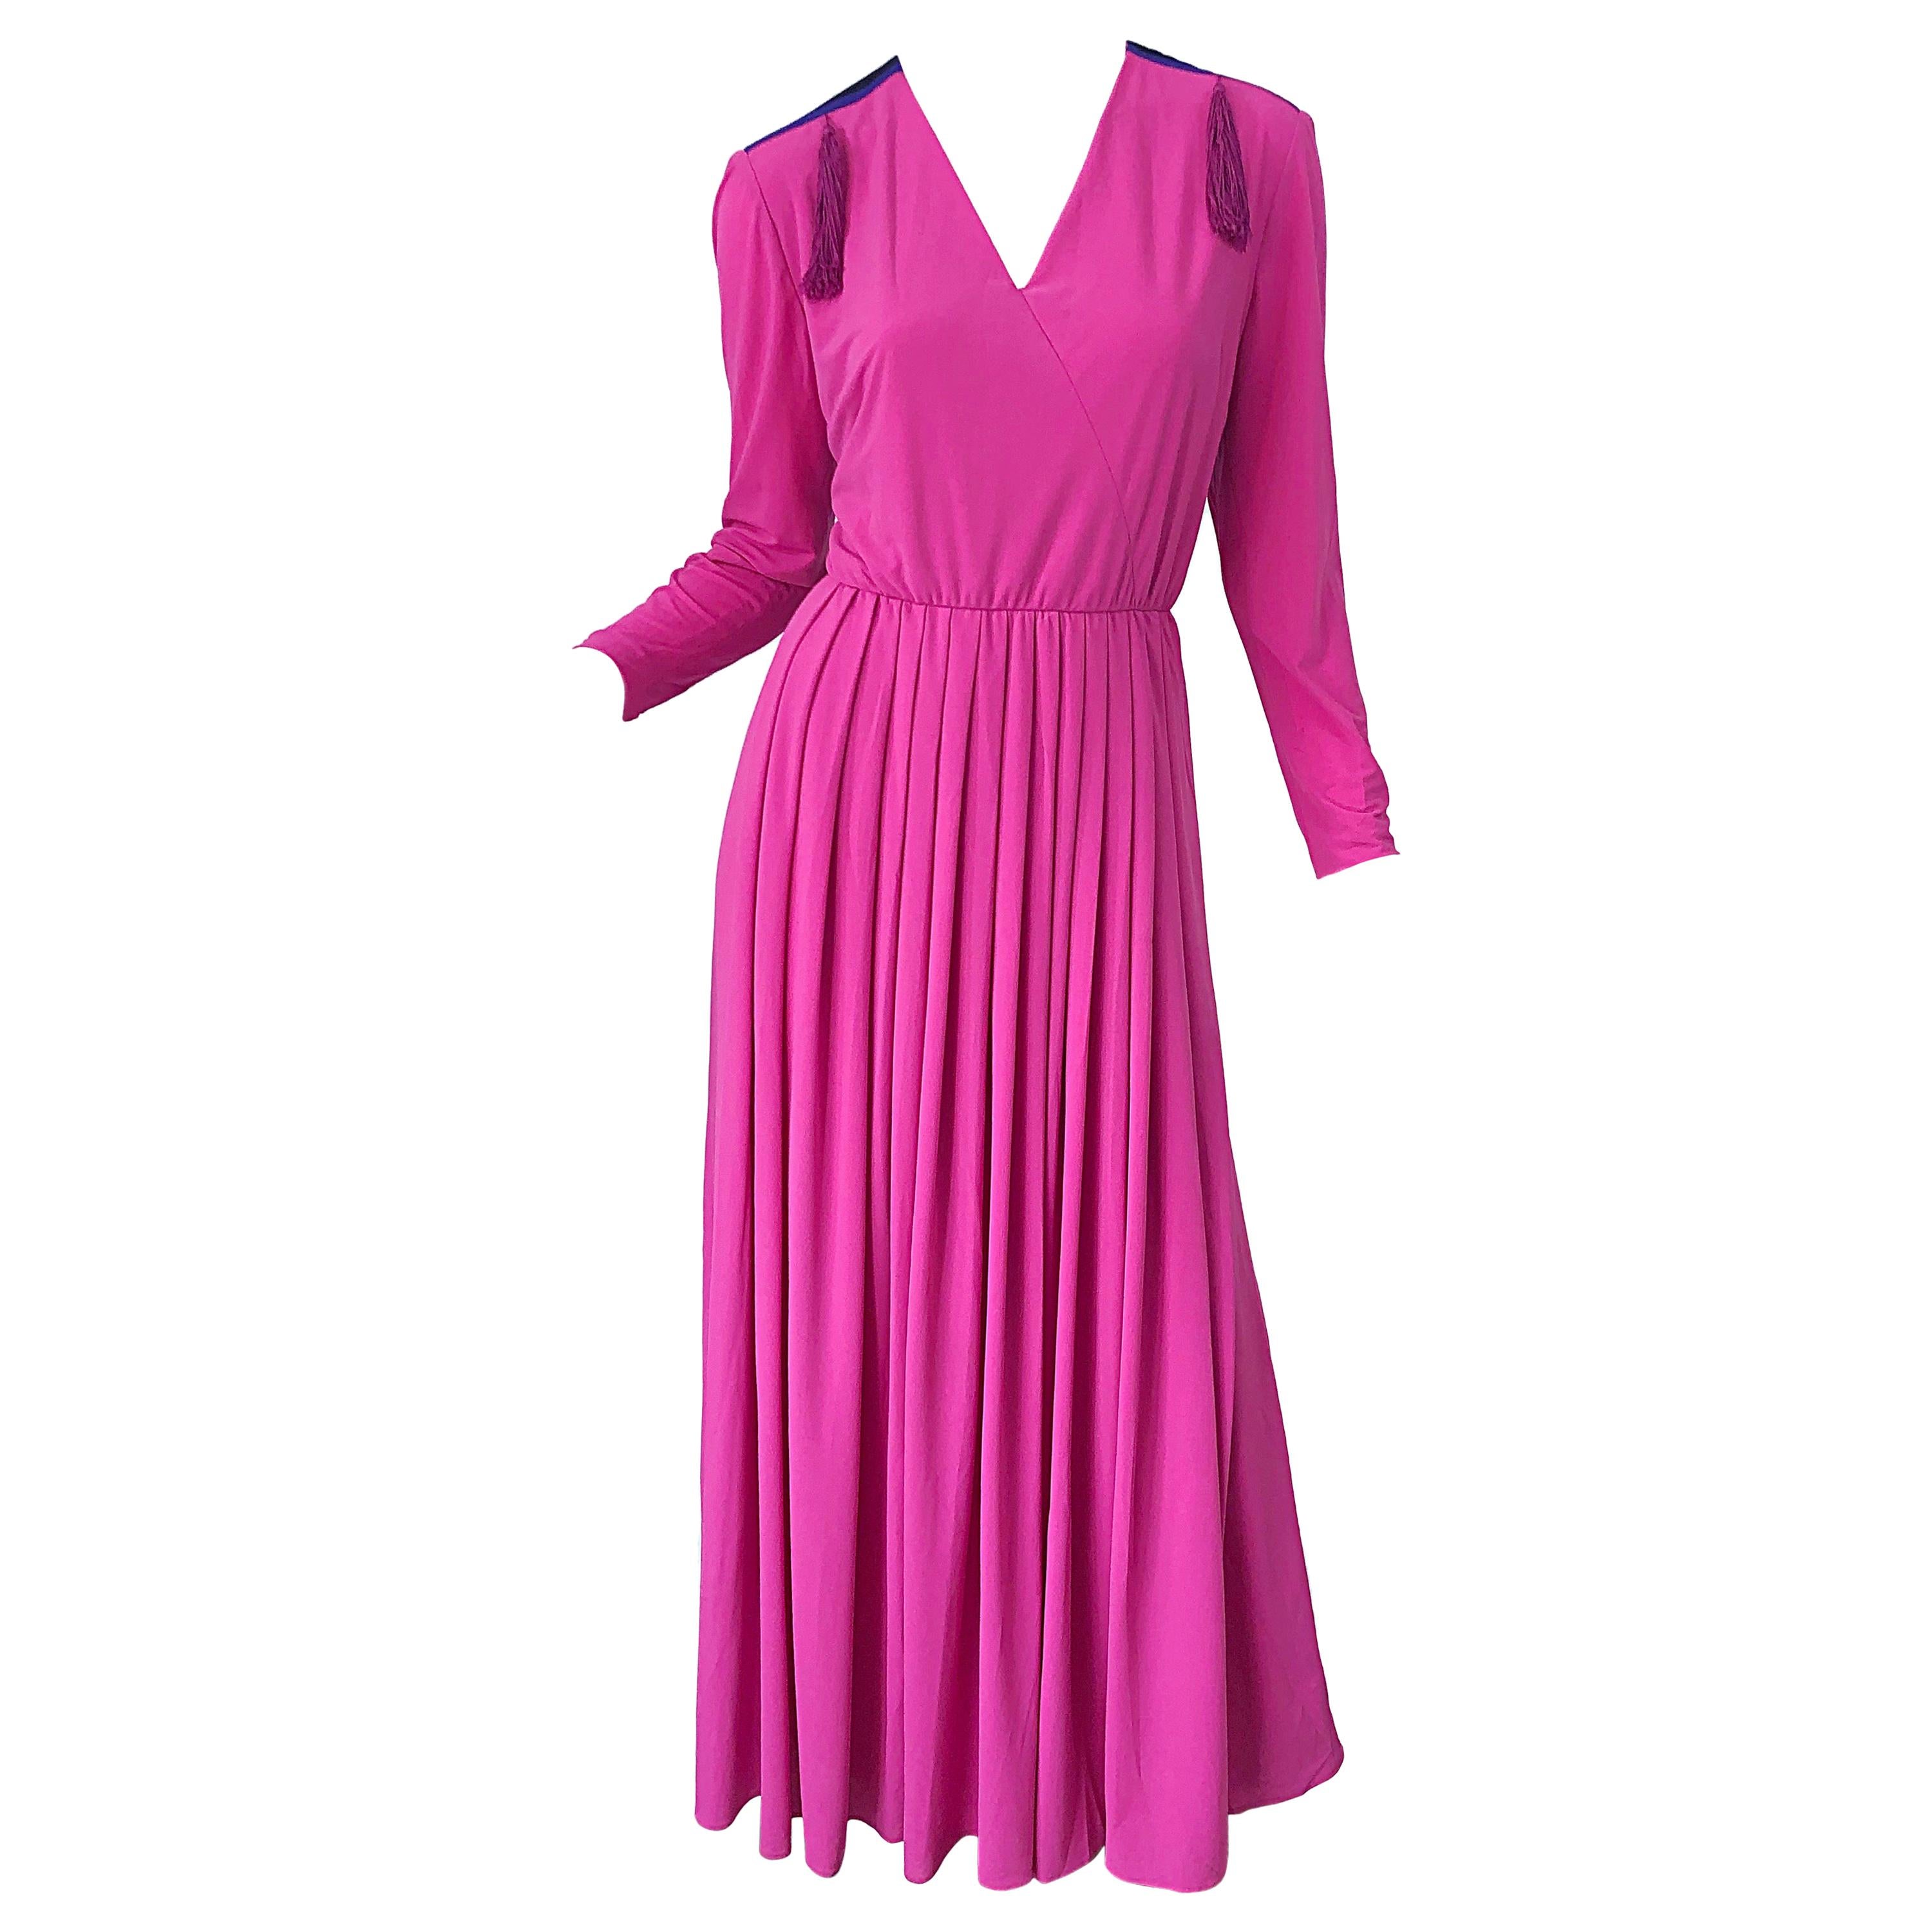 1970s Fink Modell Hot Pink Tassel Rayon Jersey Vintage 70s Maxi Dress Gown